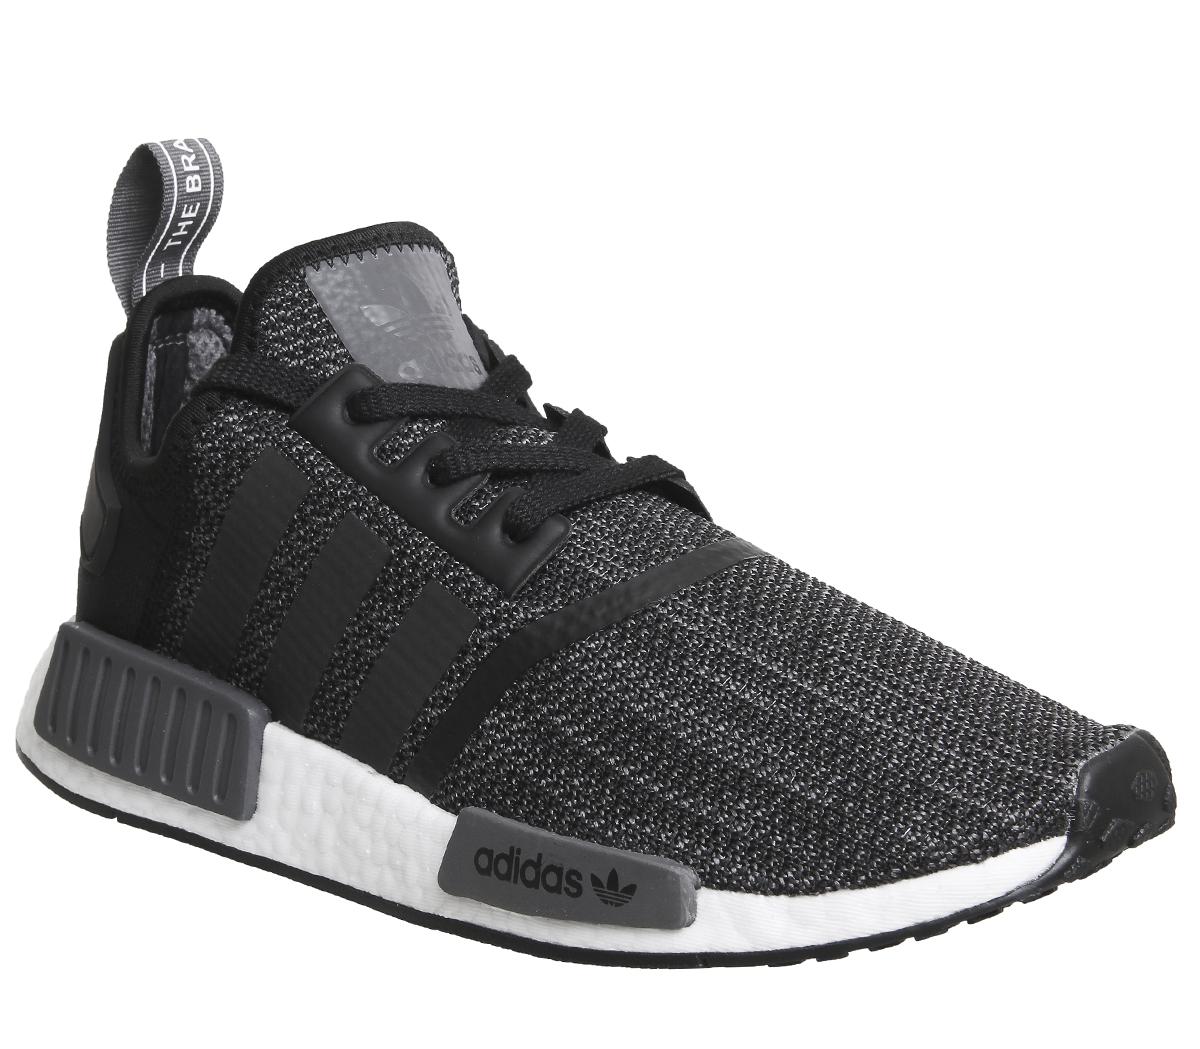 adidas Nmd R1 Trainers Core Black Grey 